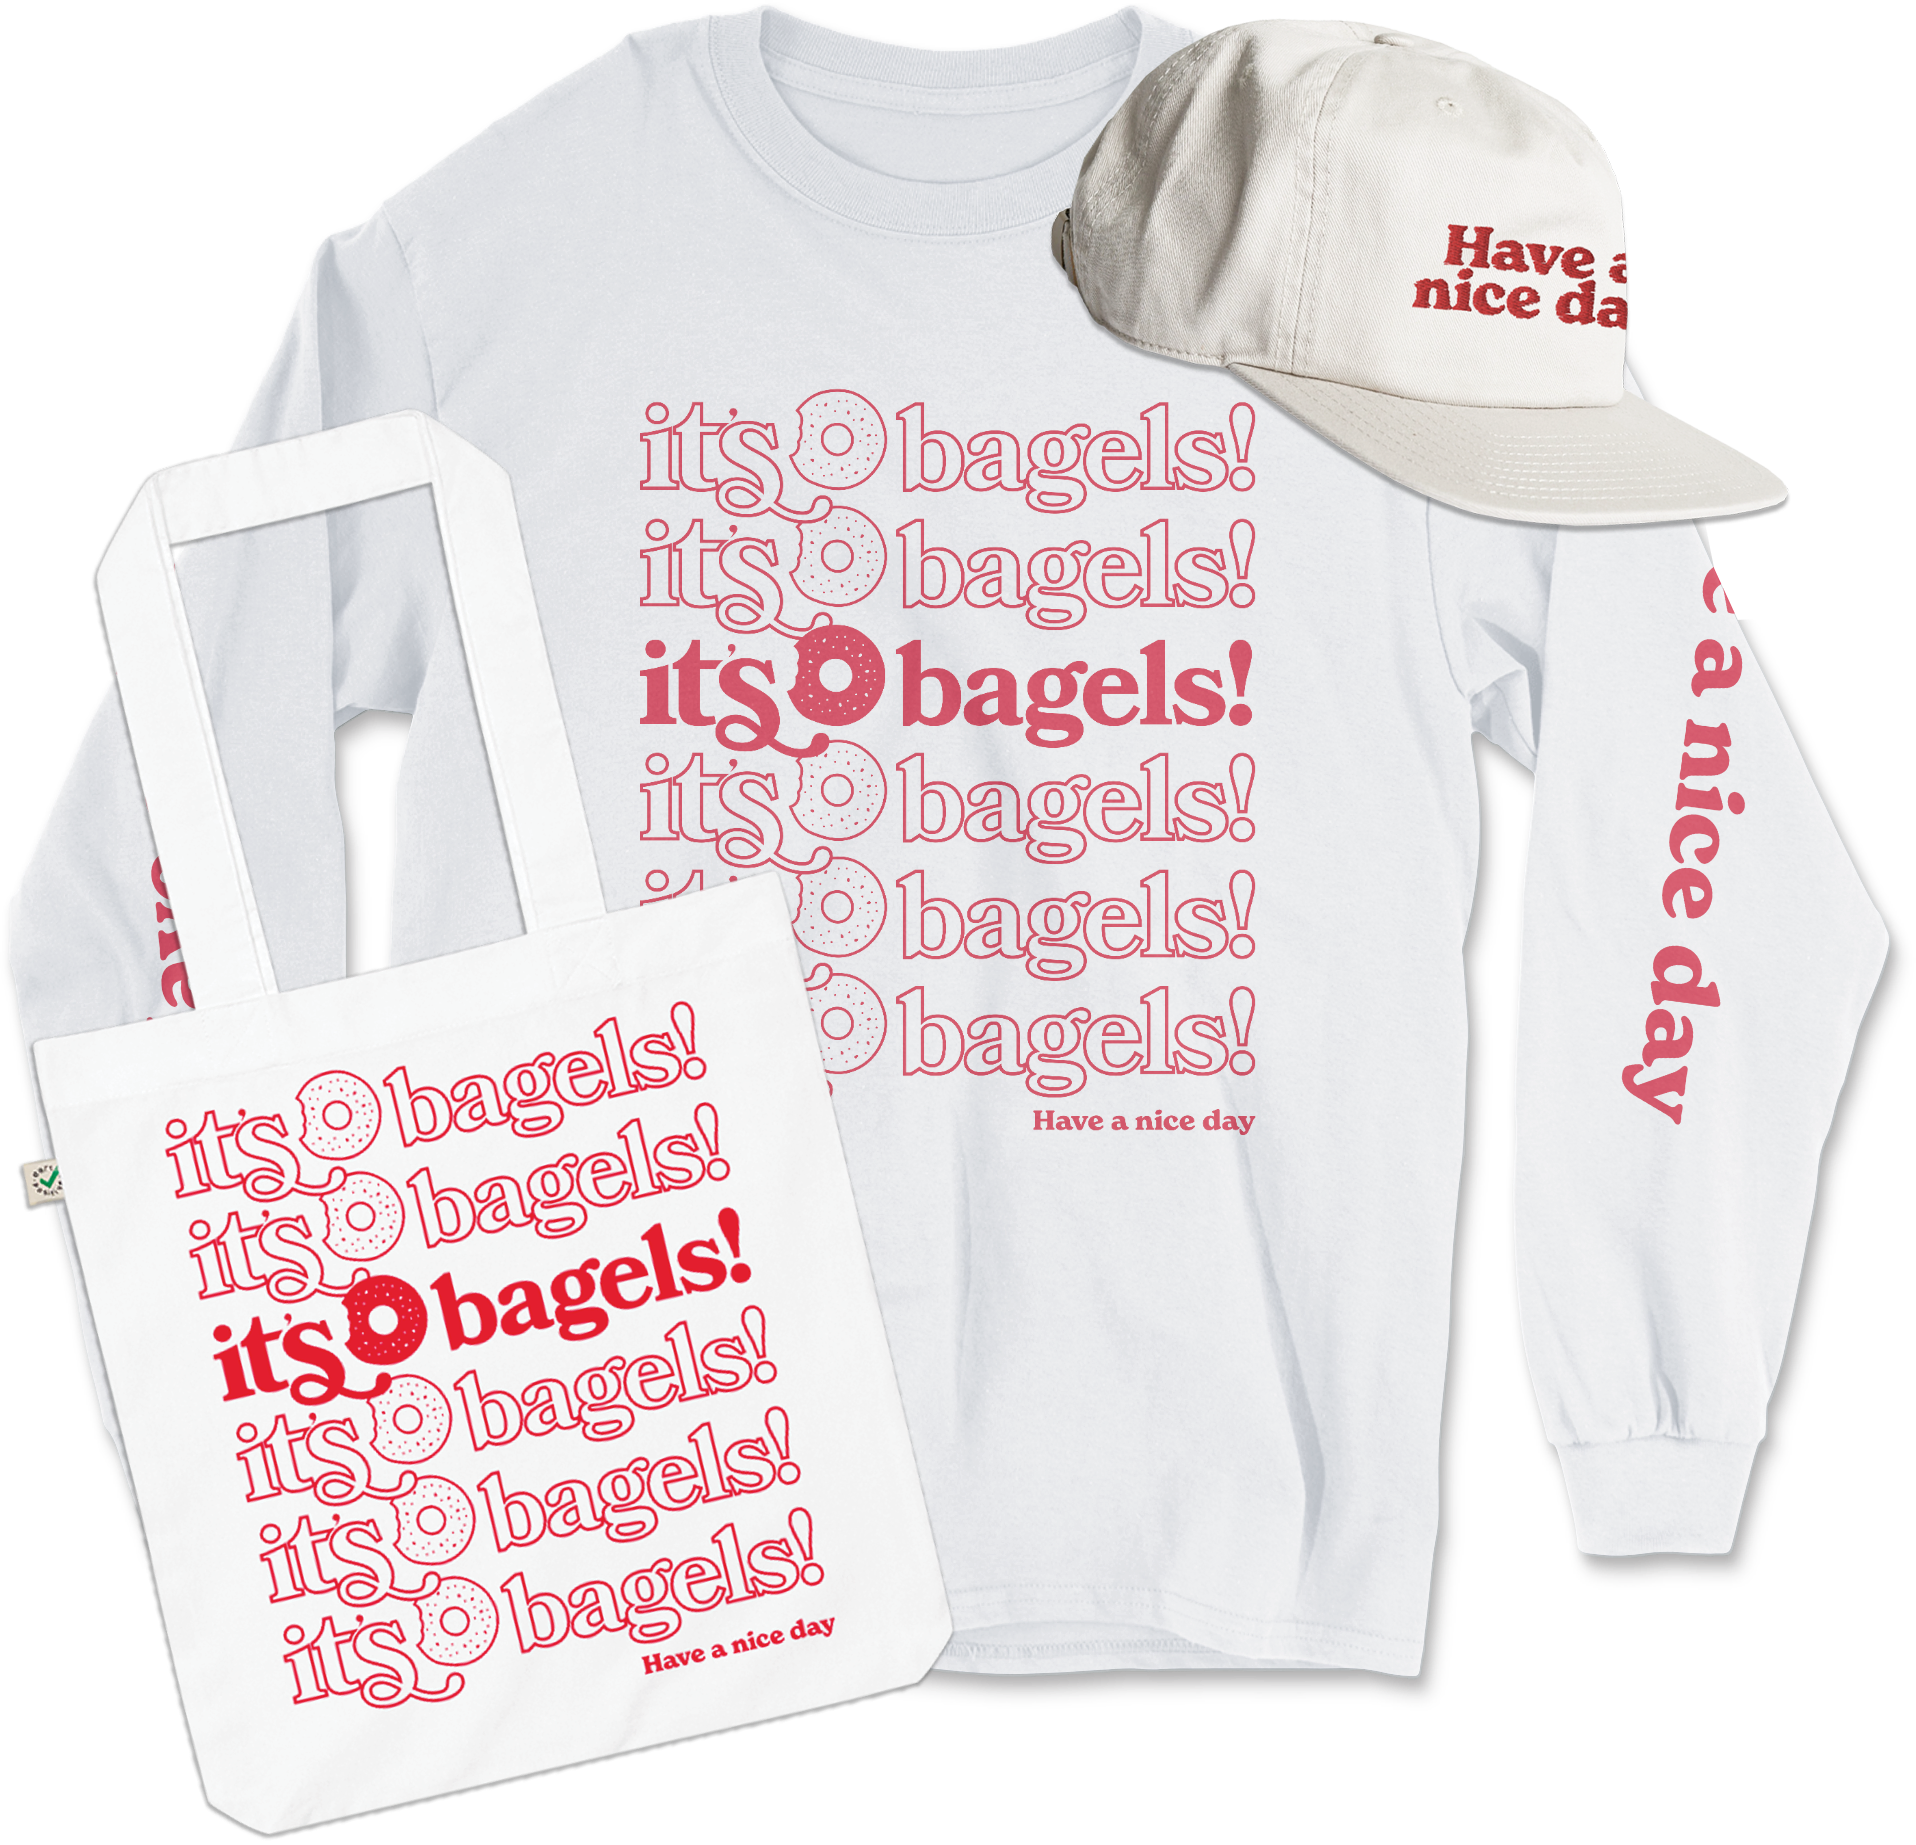 A white tote bag, long sleeve shirt, and hat, branded with the It's Bagels logo and Have a nice day in red.